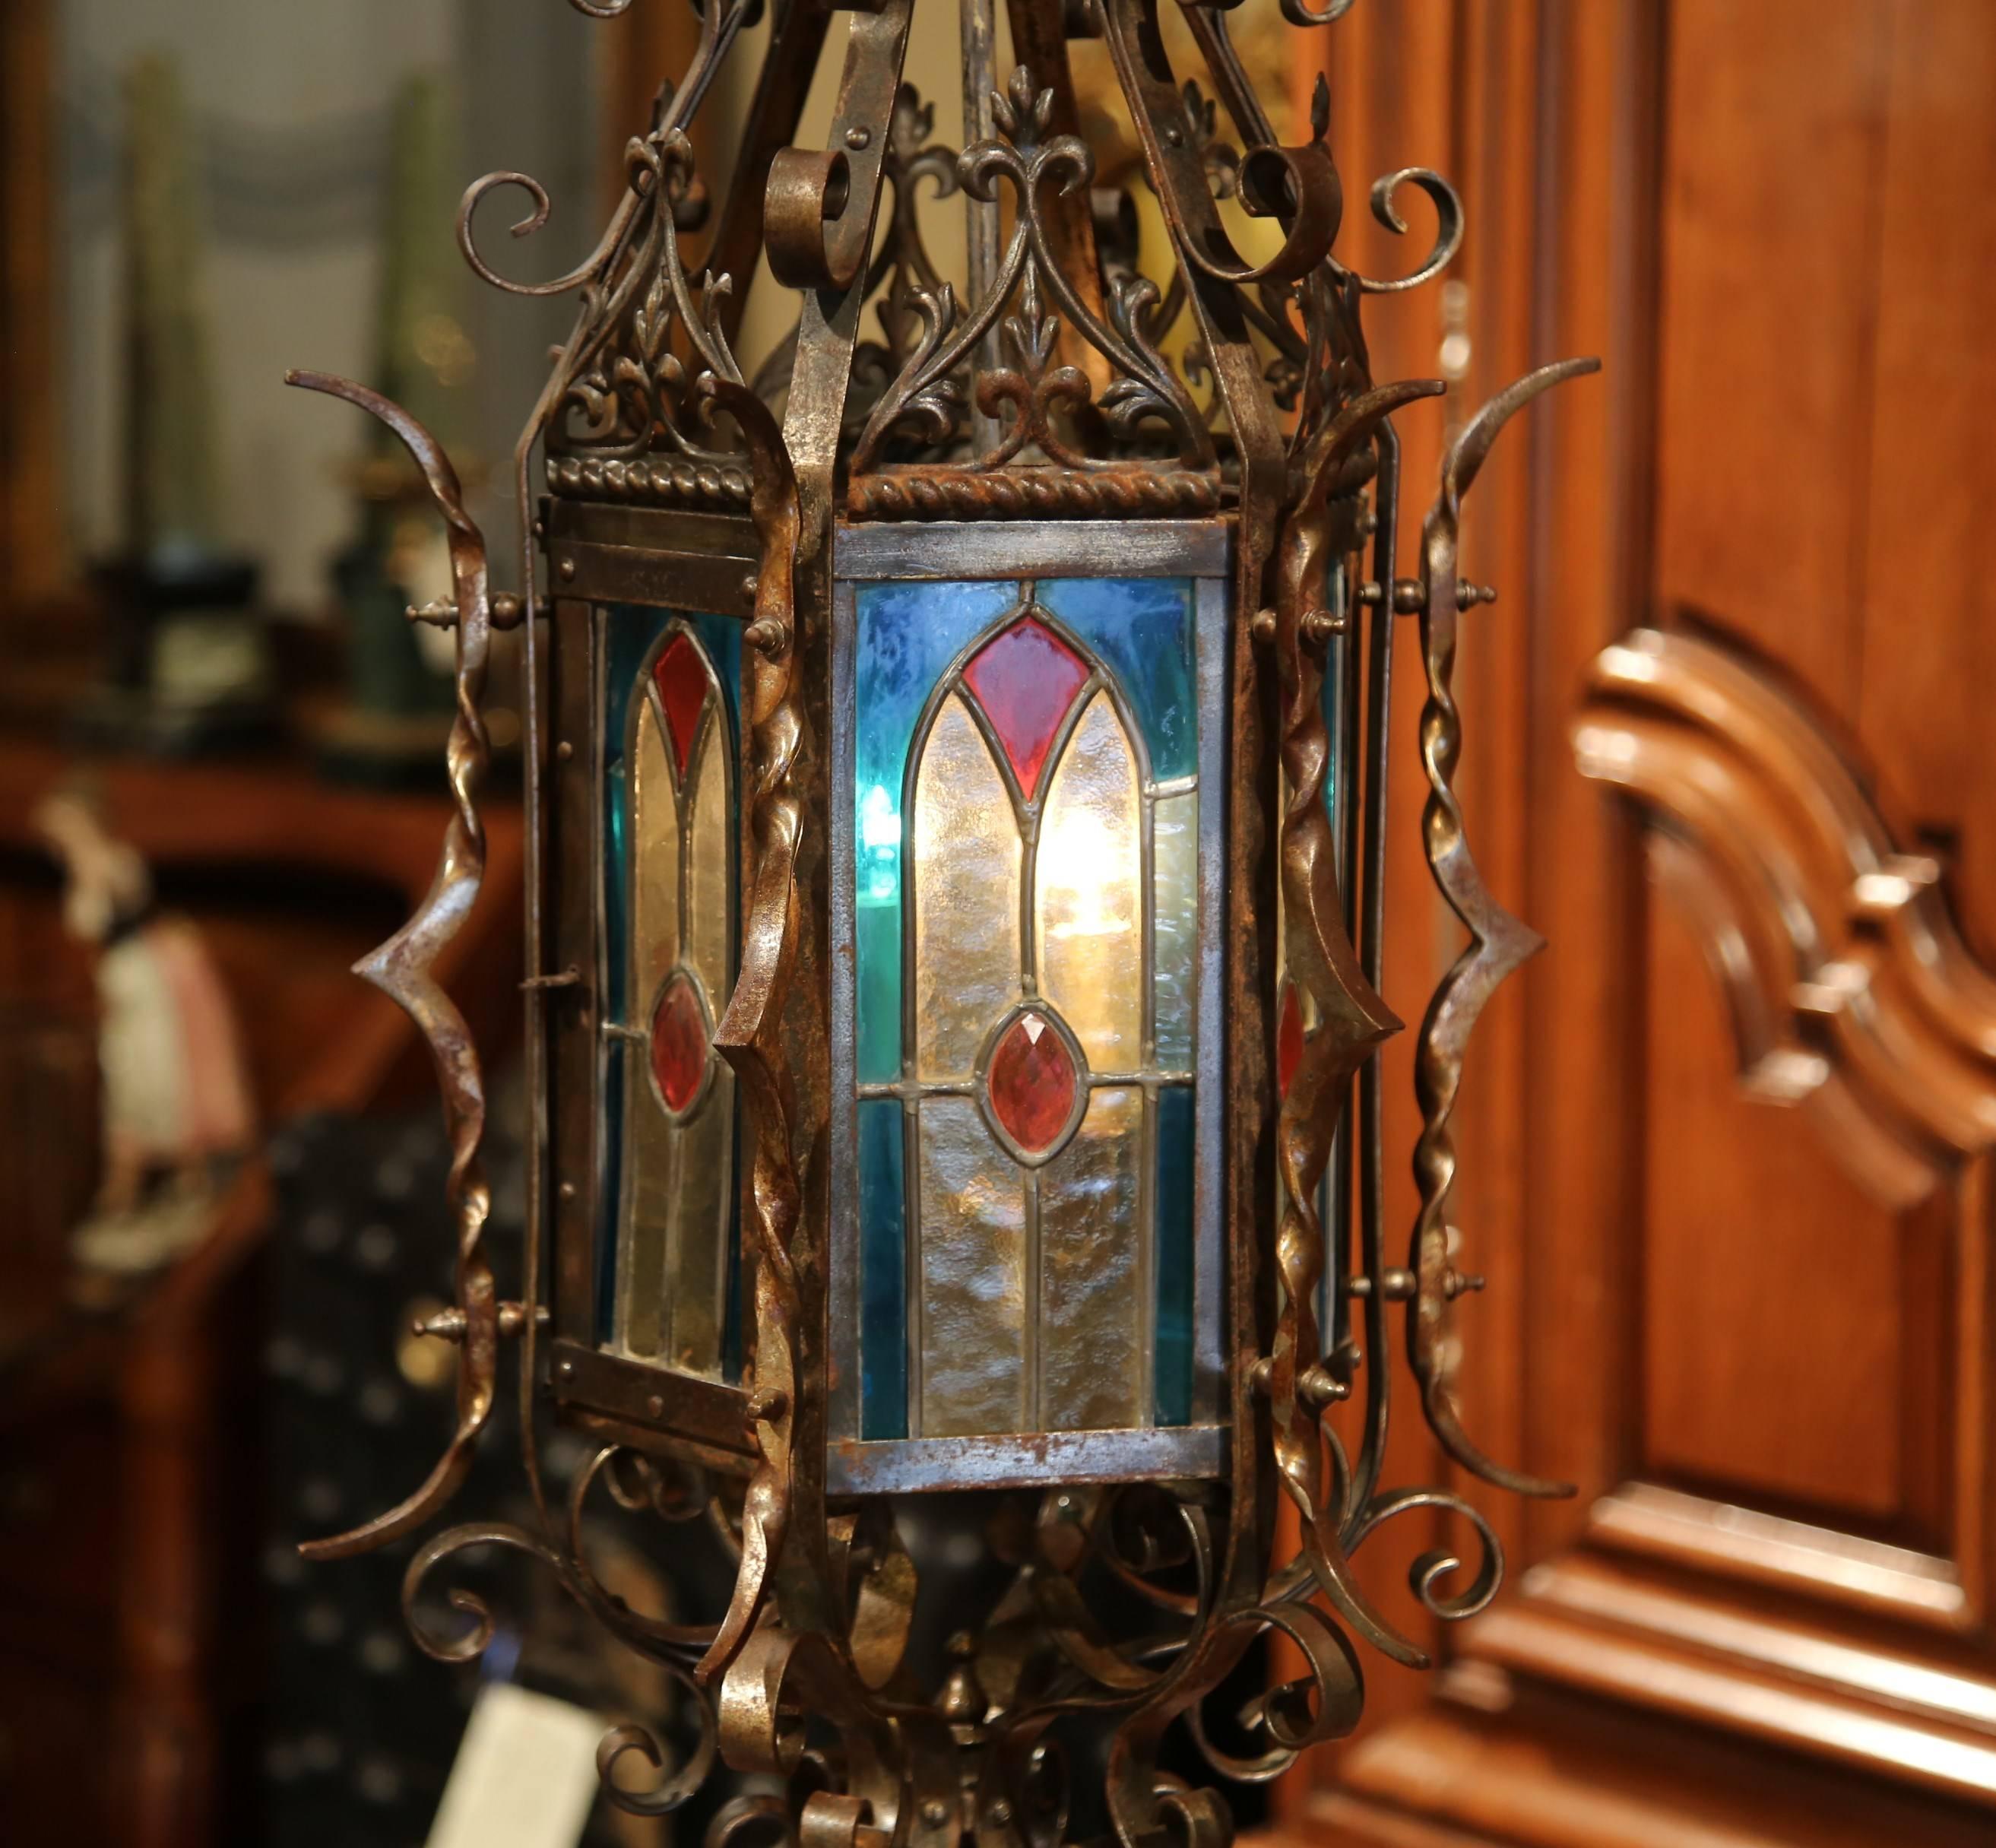 For a unique lighting feature, look no further than this beautiful, antique Gothic lantern from France, circa 1870. The French two-light hanging lantern features six painted, stained glass panels embellished with Fleur-de-Lys, and a small door to